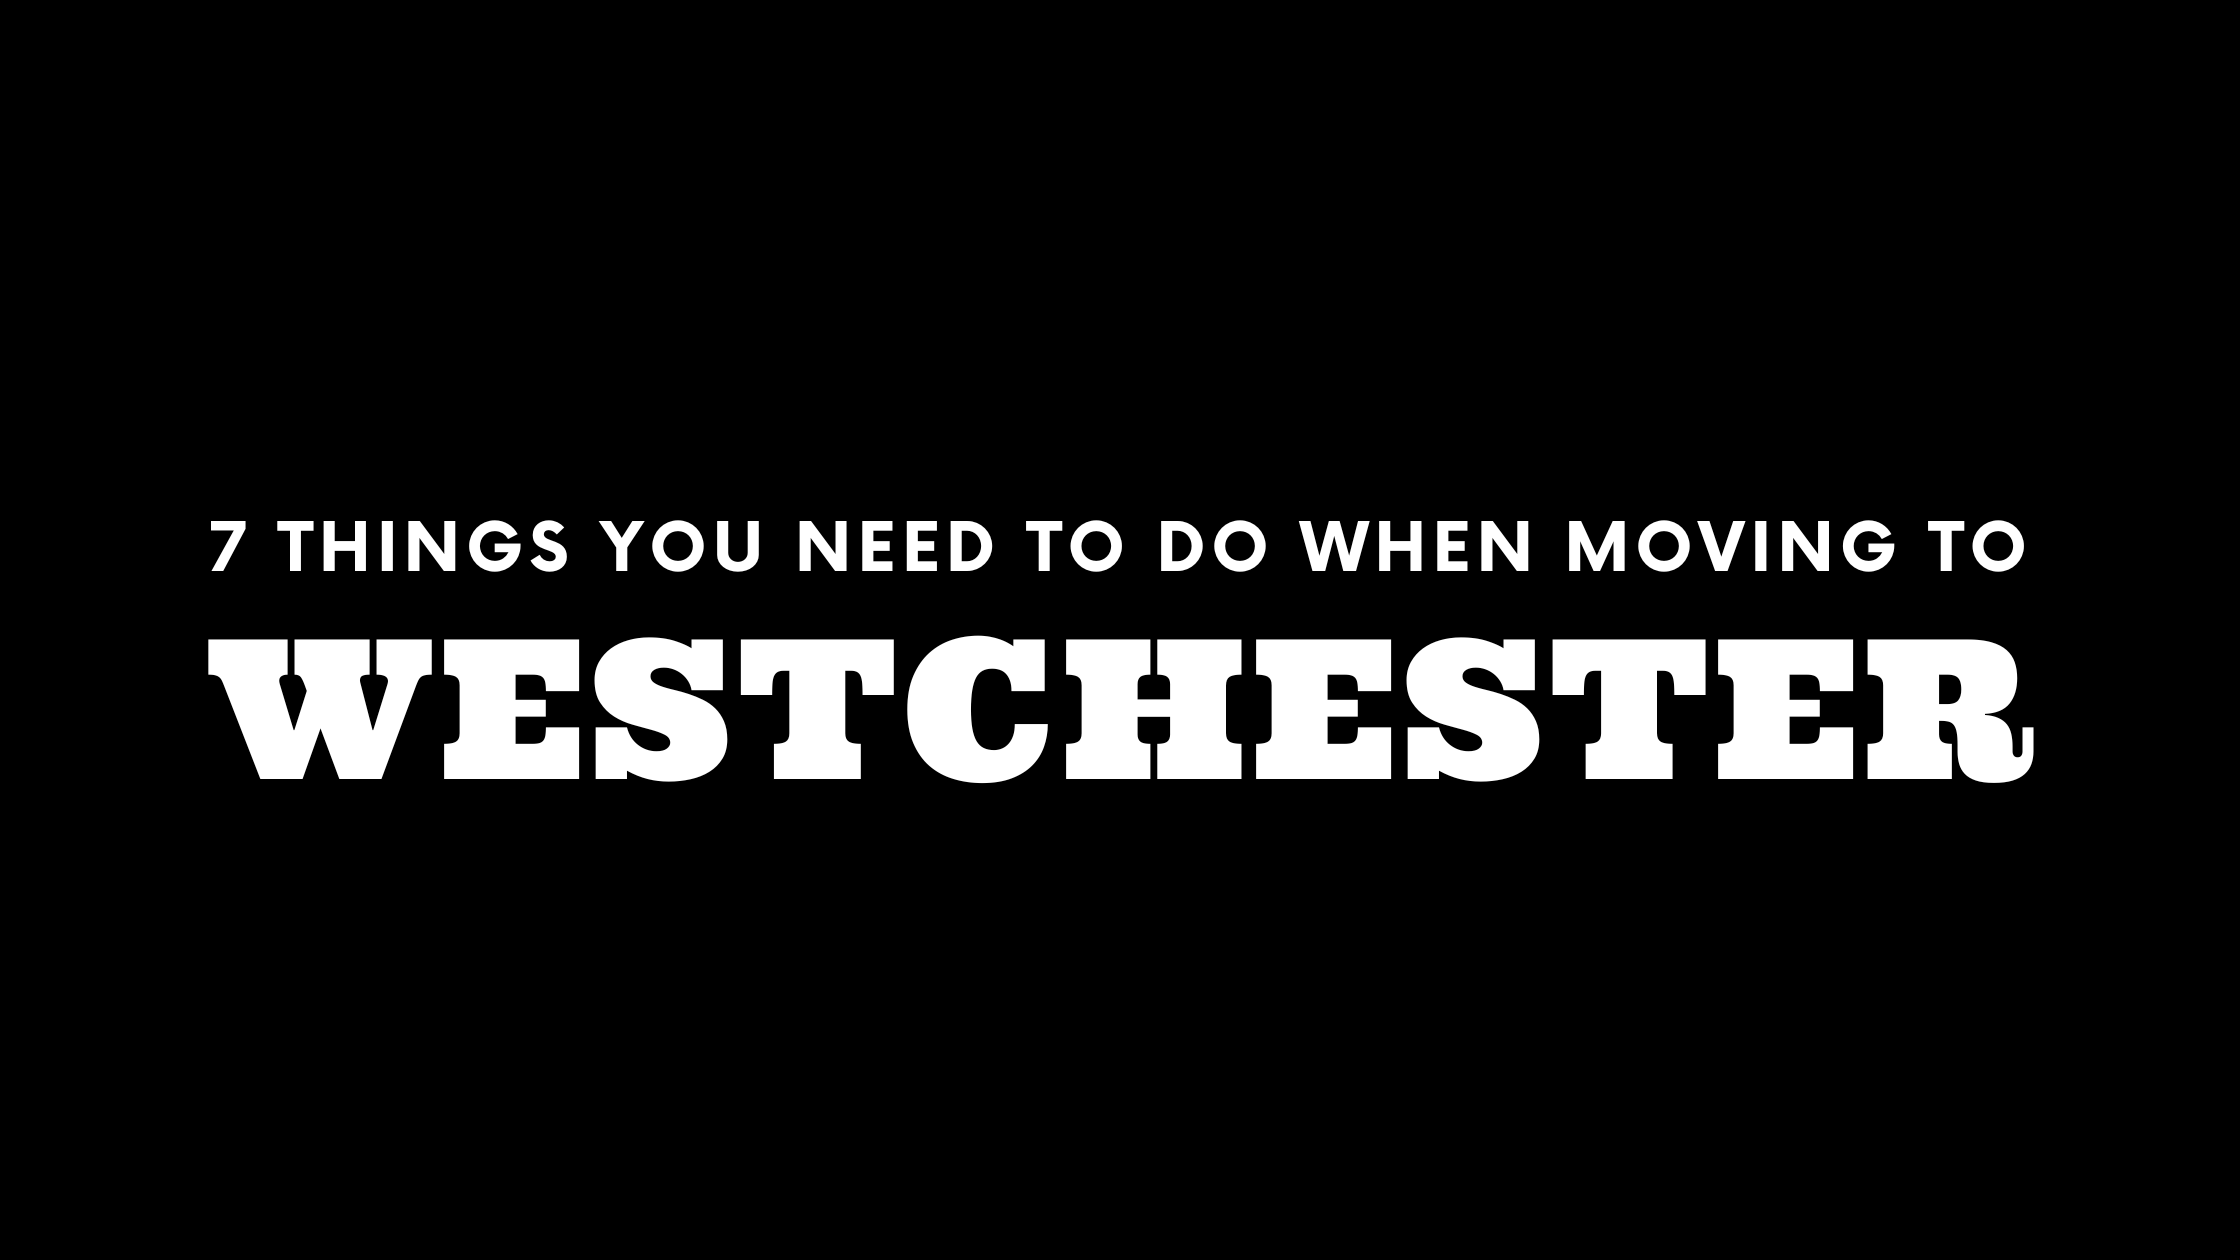 Moving to Westchester? 7 Things You Need To Do Immediately!